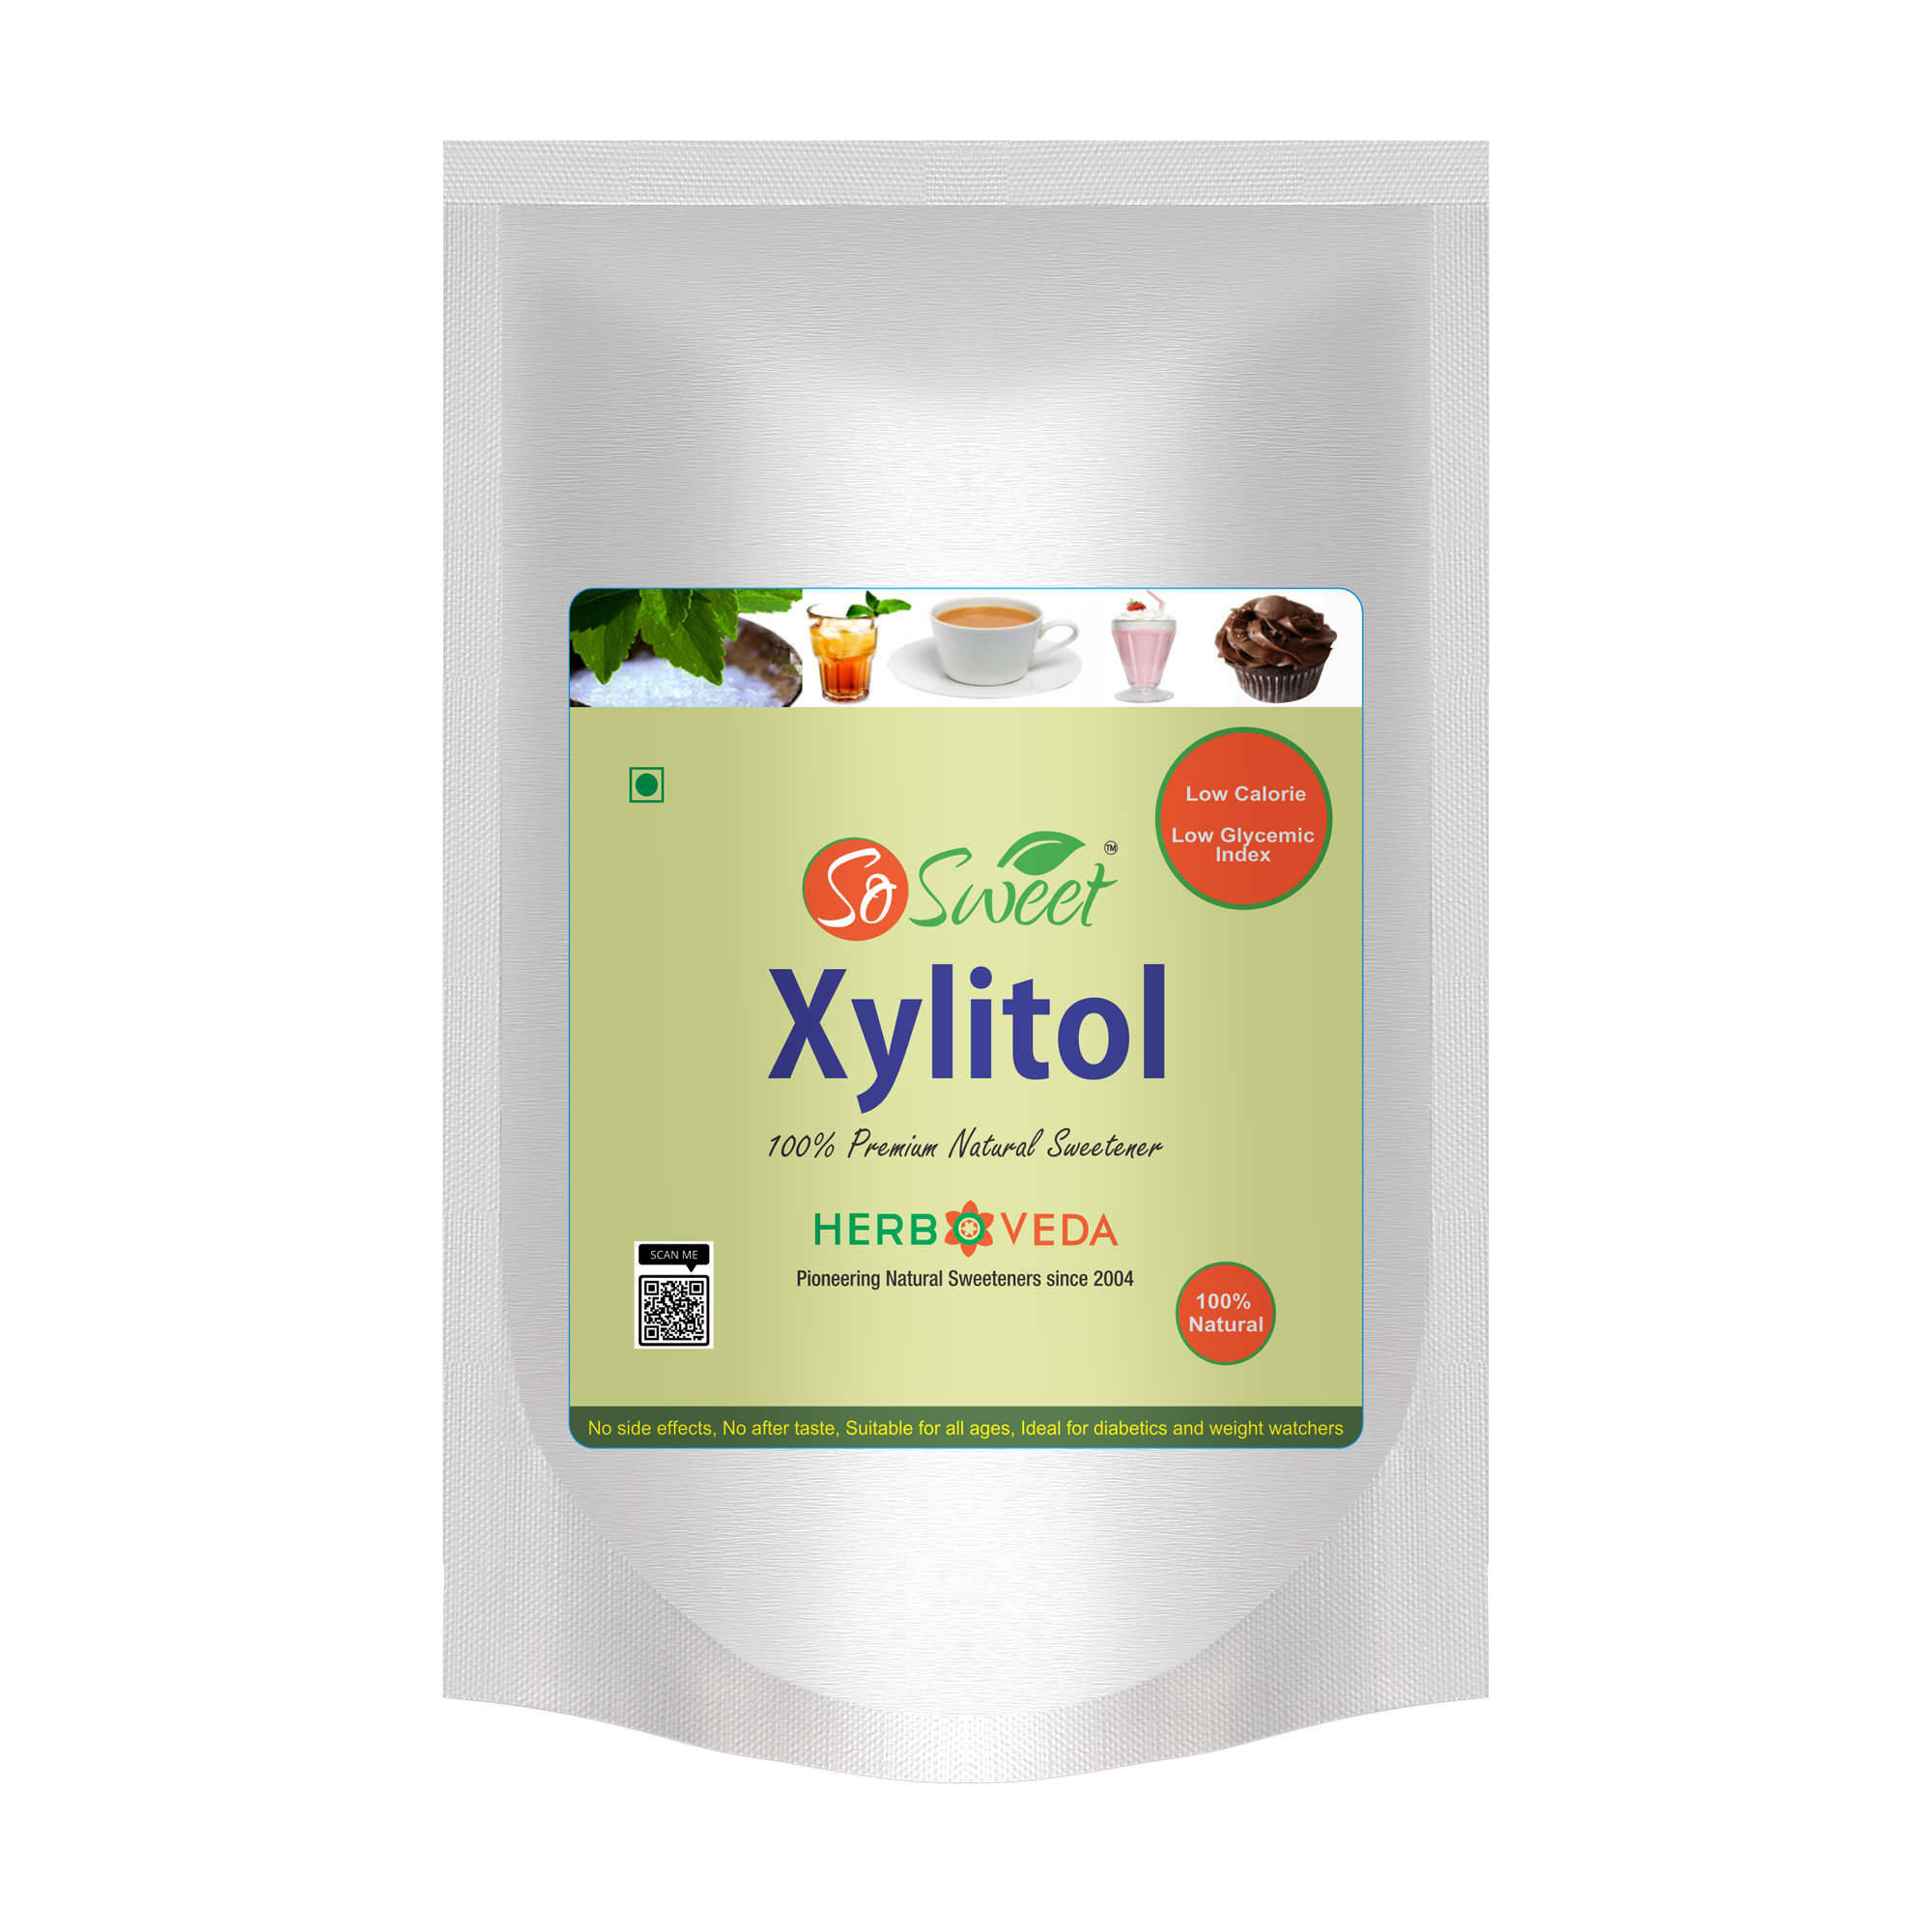 Xylitol: The Sweetener That Is Not So Sweet for Pets